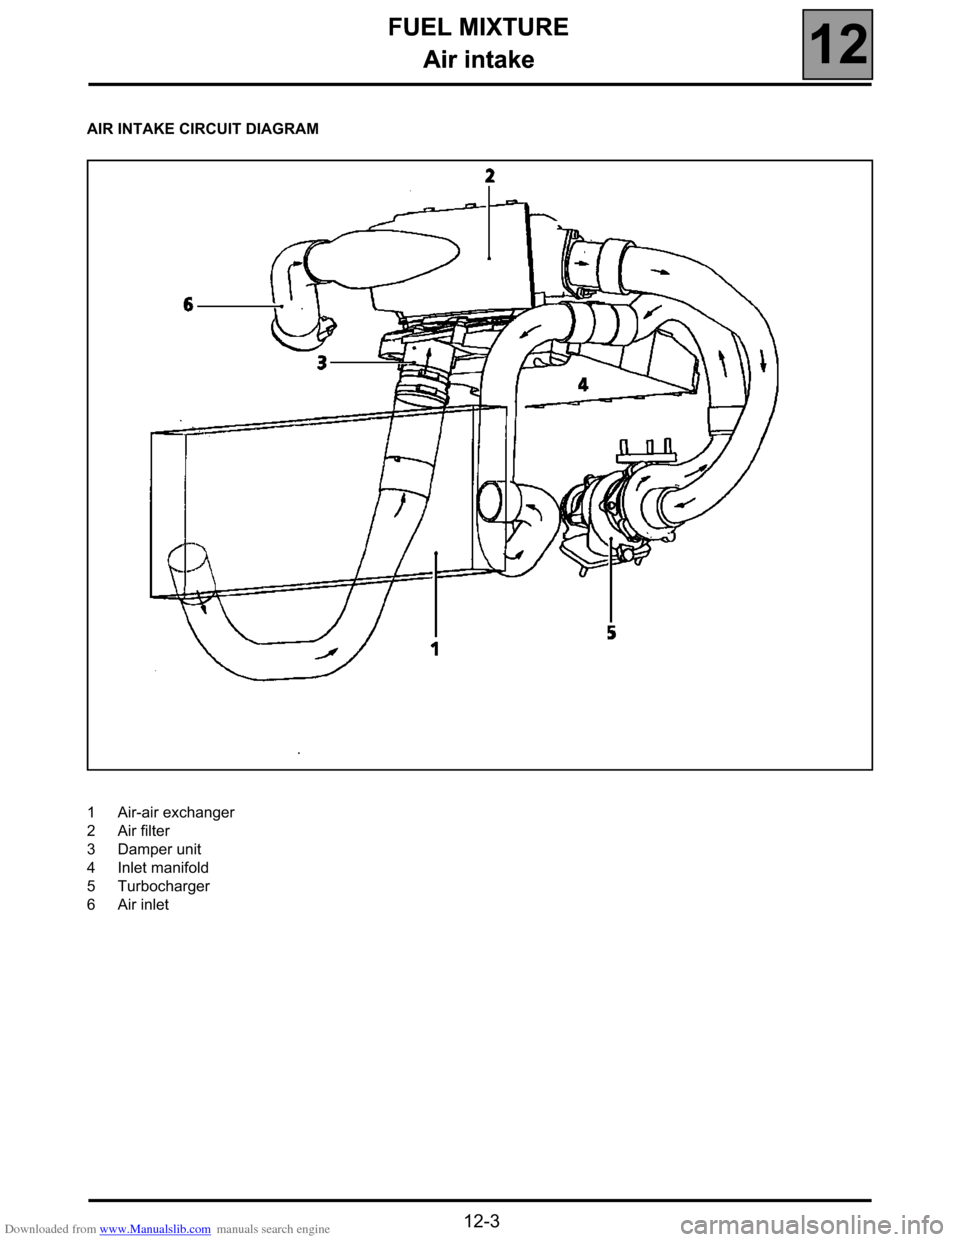 RENAULT ESPACE 2000 J66 / 3.G Technical Note 3426A Workshop Manual Downloaded from www.Manualslib.com manuals search engine FUEL MIXTURE
Air intake
12
12-3
FUEL MIXTURE
Air intake
AIR INTAKE CIRCUIT DIAGRAM
1Air-air exchanger
2Air filter
3Damper unit
4Inlet manifold
